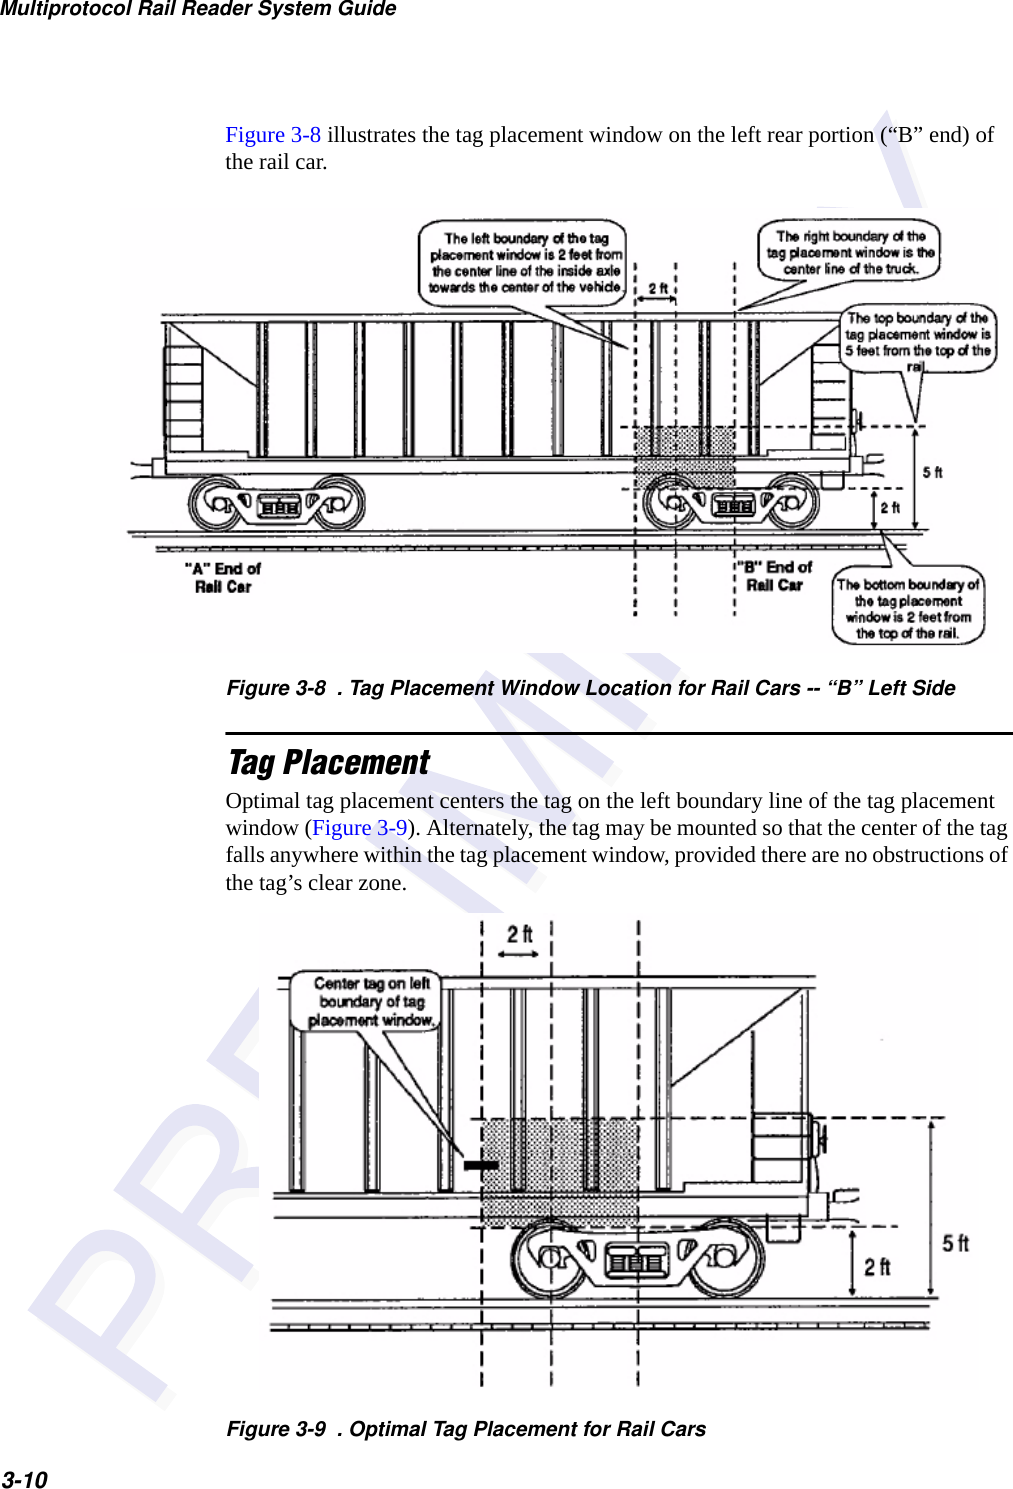 Multiprotocol Rail Reader System Guide3-10Figure 3-8 illustrates the tag placement window on the left rear portion (“B” end) of the rail car.Figure 3-8  . Tag Placement Window Location for Rail Cars -- “B” Left SideTag PlacementOptimal tag placement centers the tag on the left boundary line of the tag placement window (Figure 3-9). Alternately, the tag may be mounted so that the center of the tag falls anywhere within the tag placement window, provided there are no obstructions of the tag’s clear zone.Figure 3-9  . Optimal Tag Placement for Rail Cars